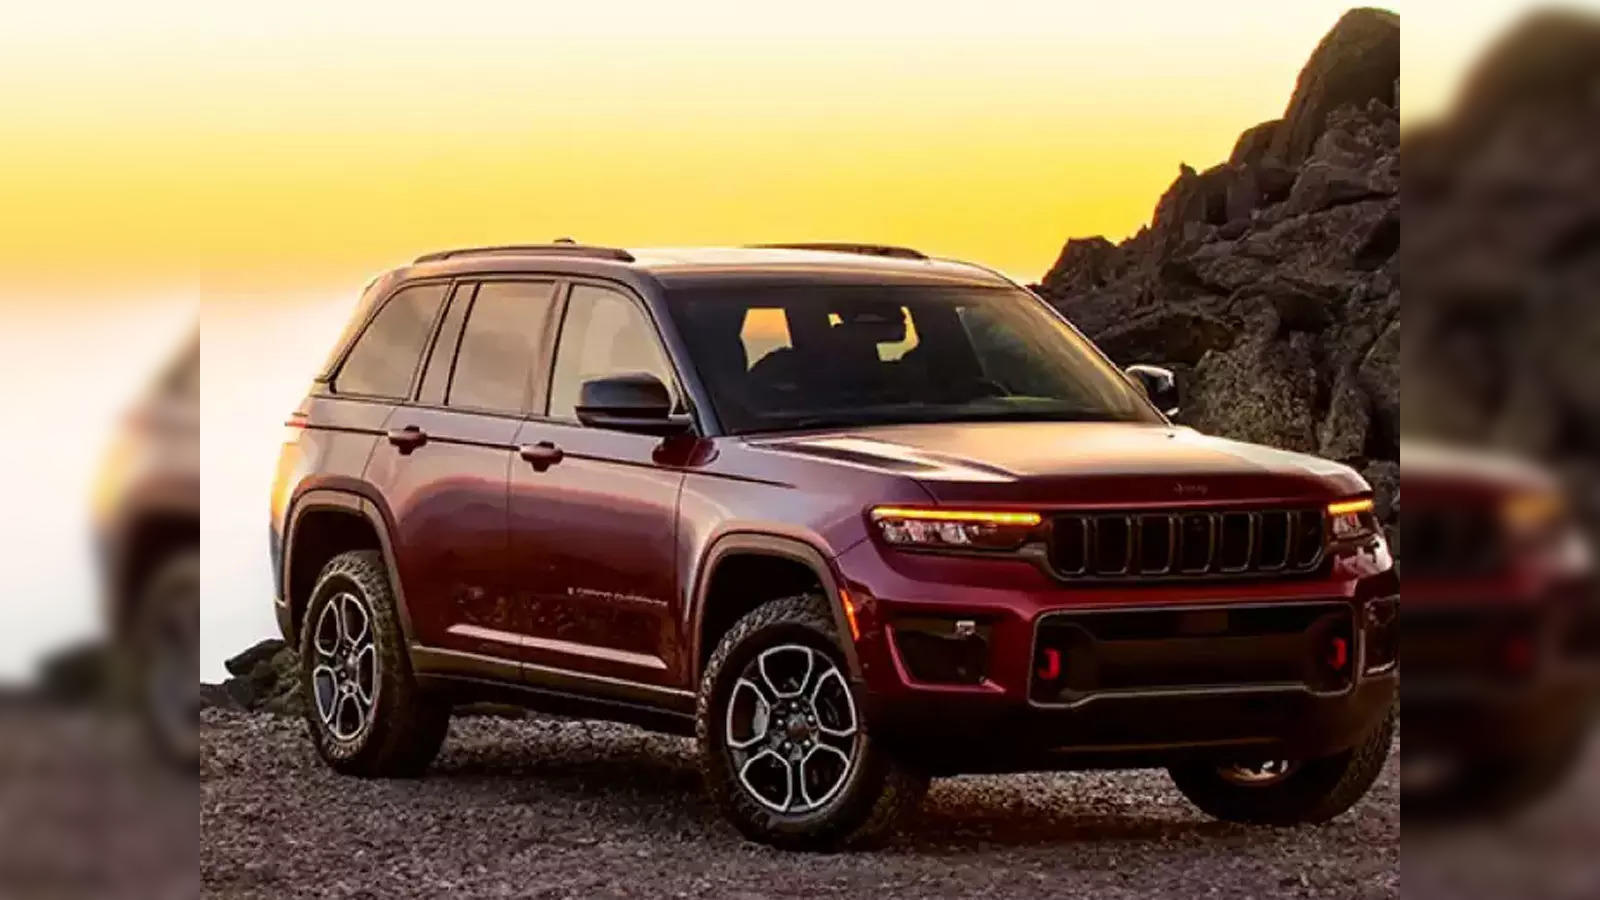 Jeep Grand Cherokee Price: 2022 Jeep Grand Cherokee: Price, specifications,  and important details - The Economic Times